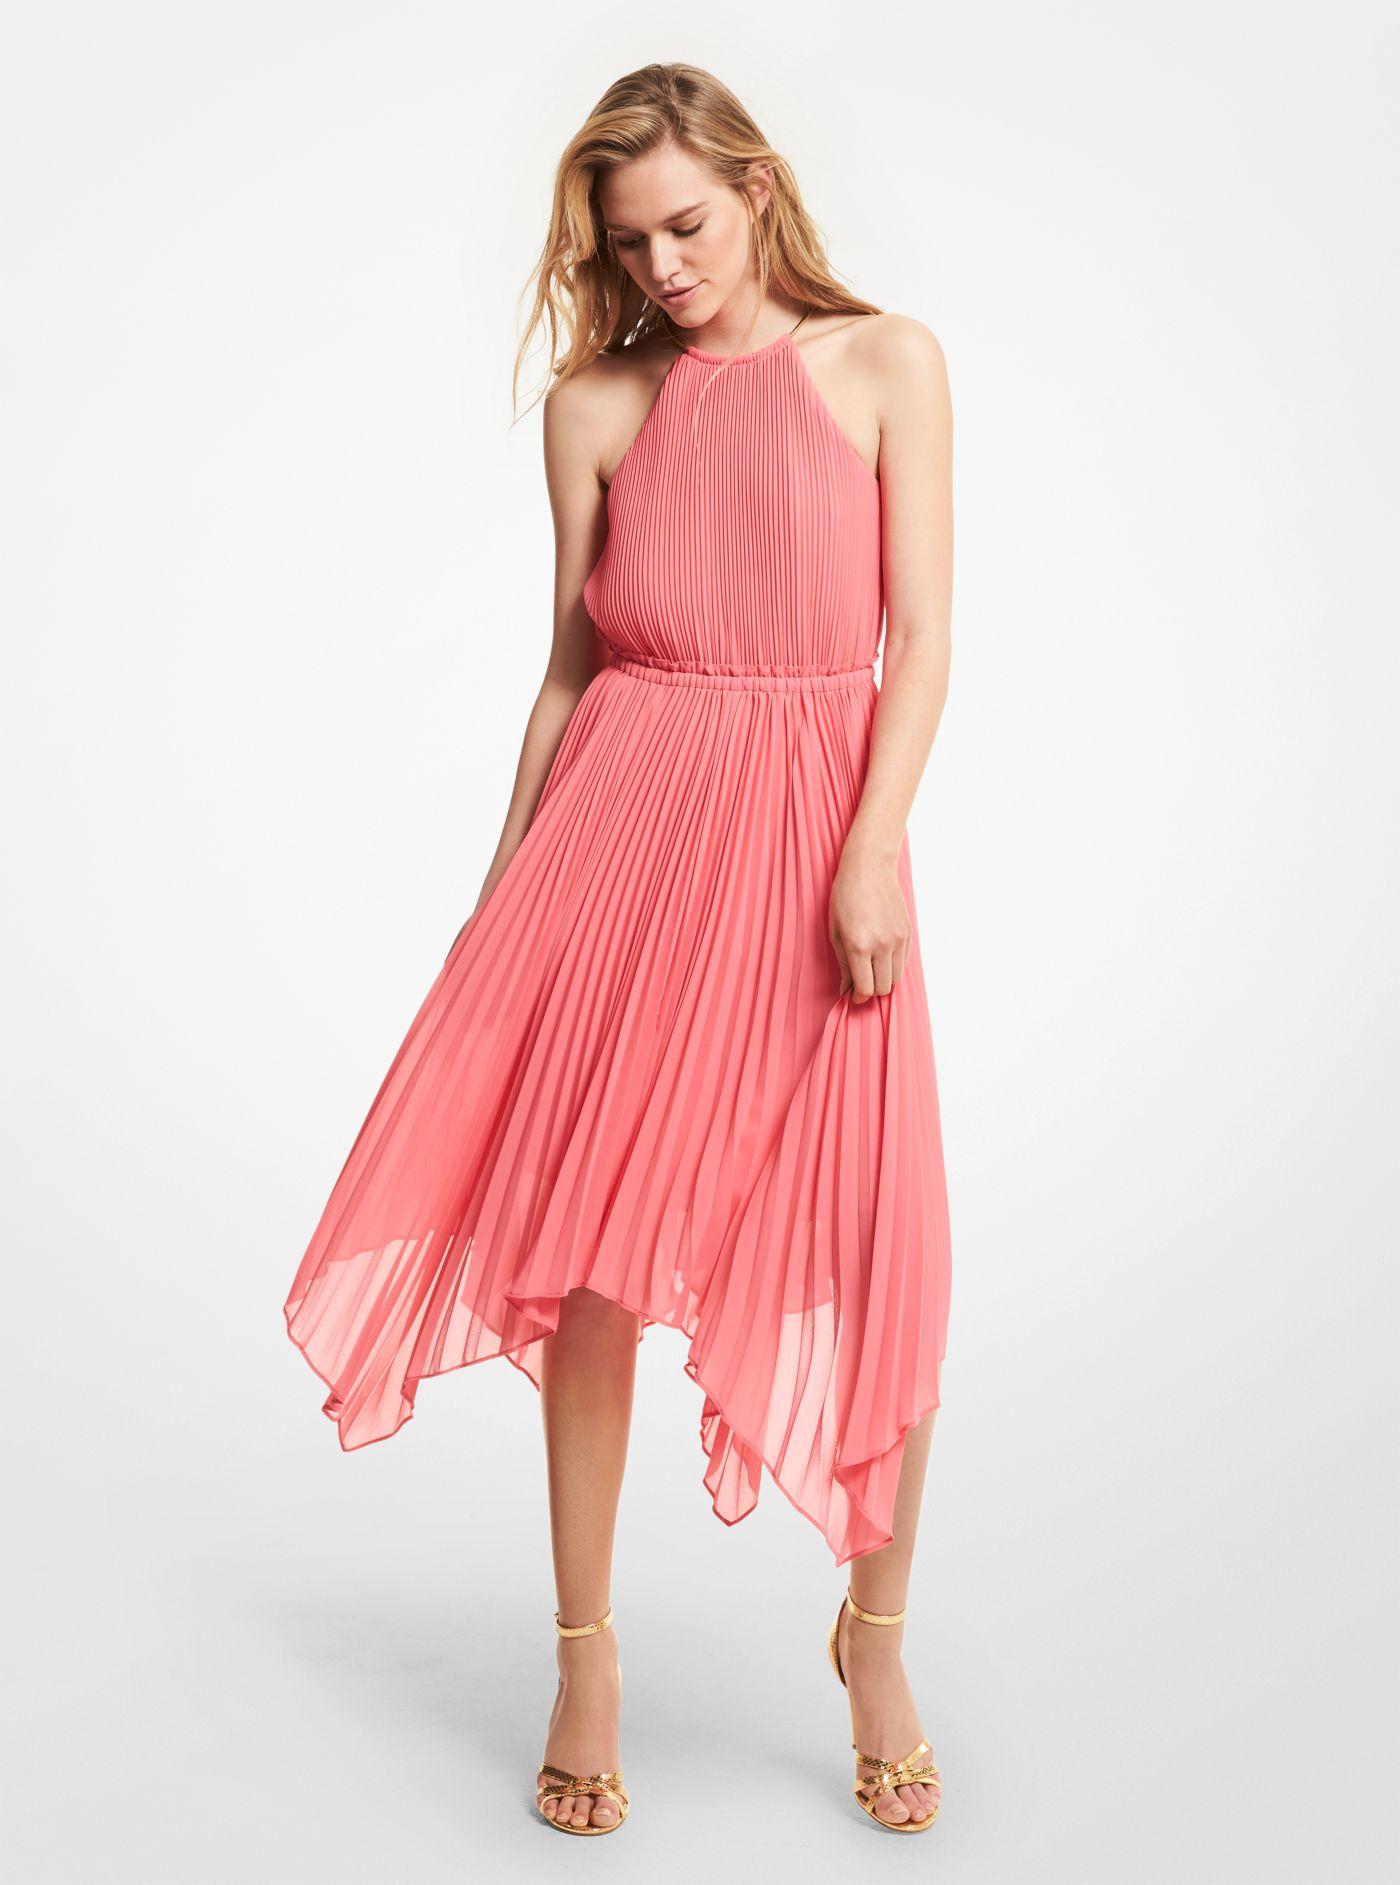 Michael Kors Synthetic Pleated Georgette Halter Dress in Blush 